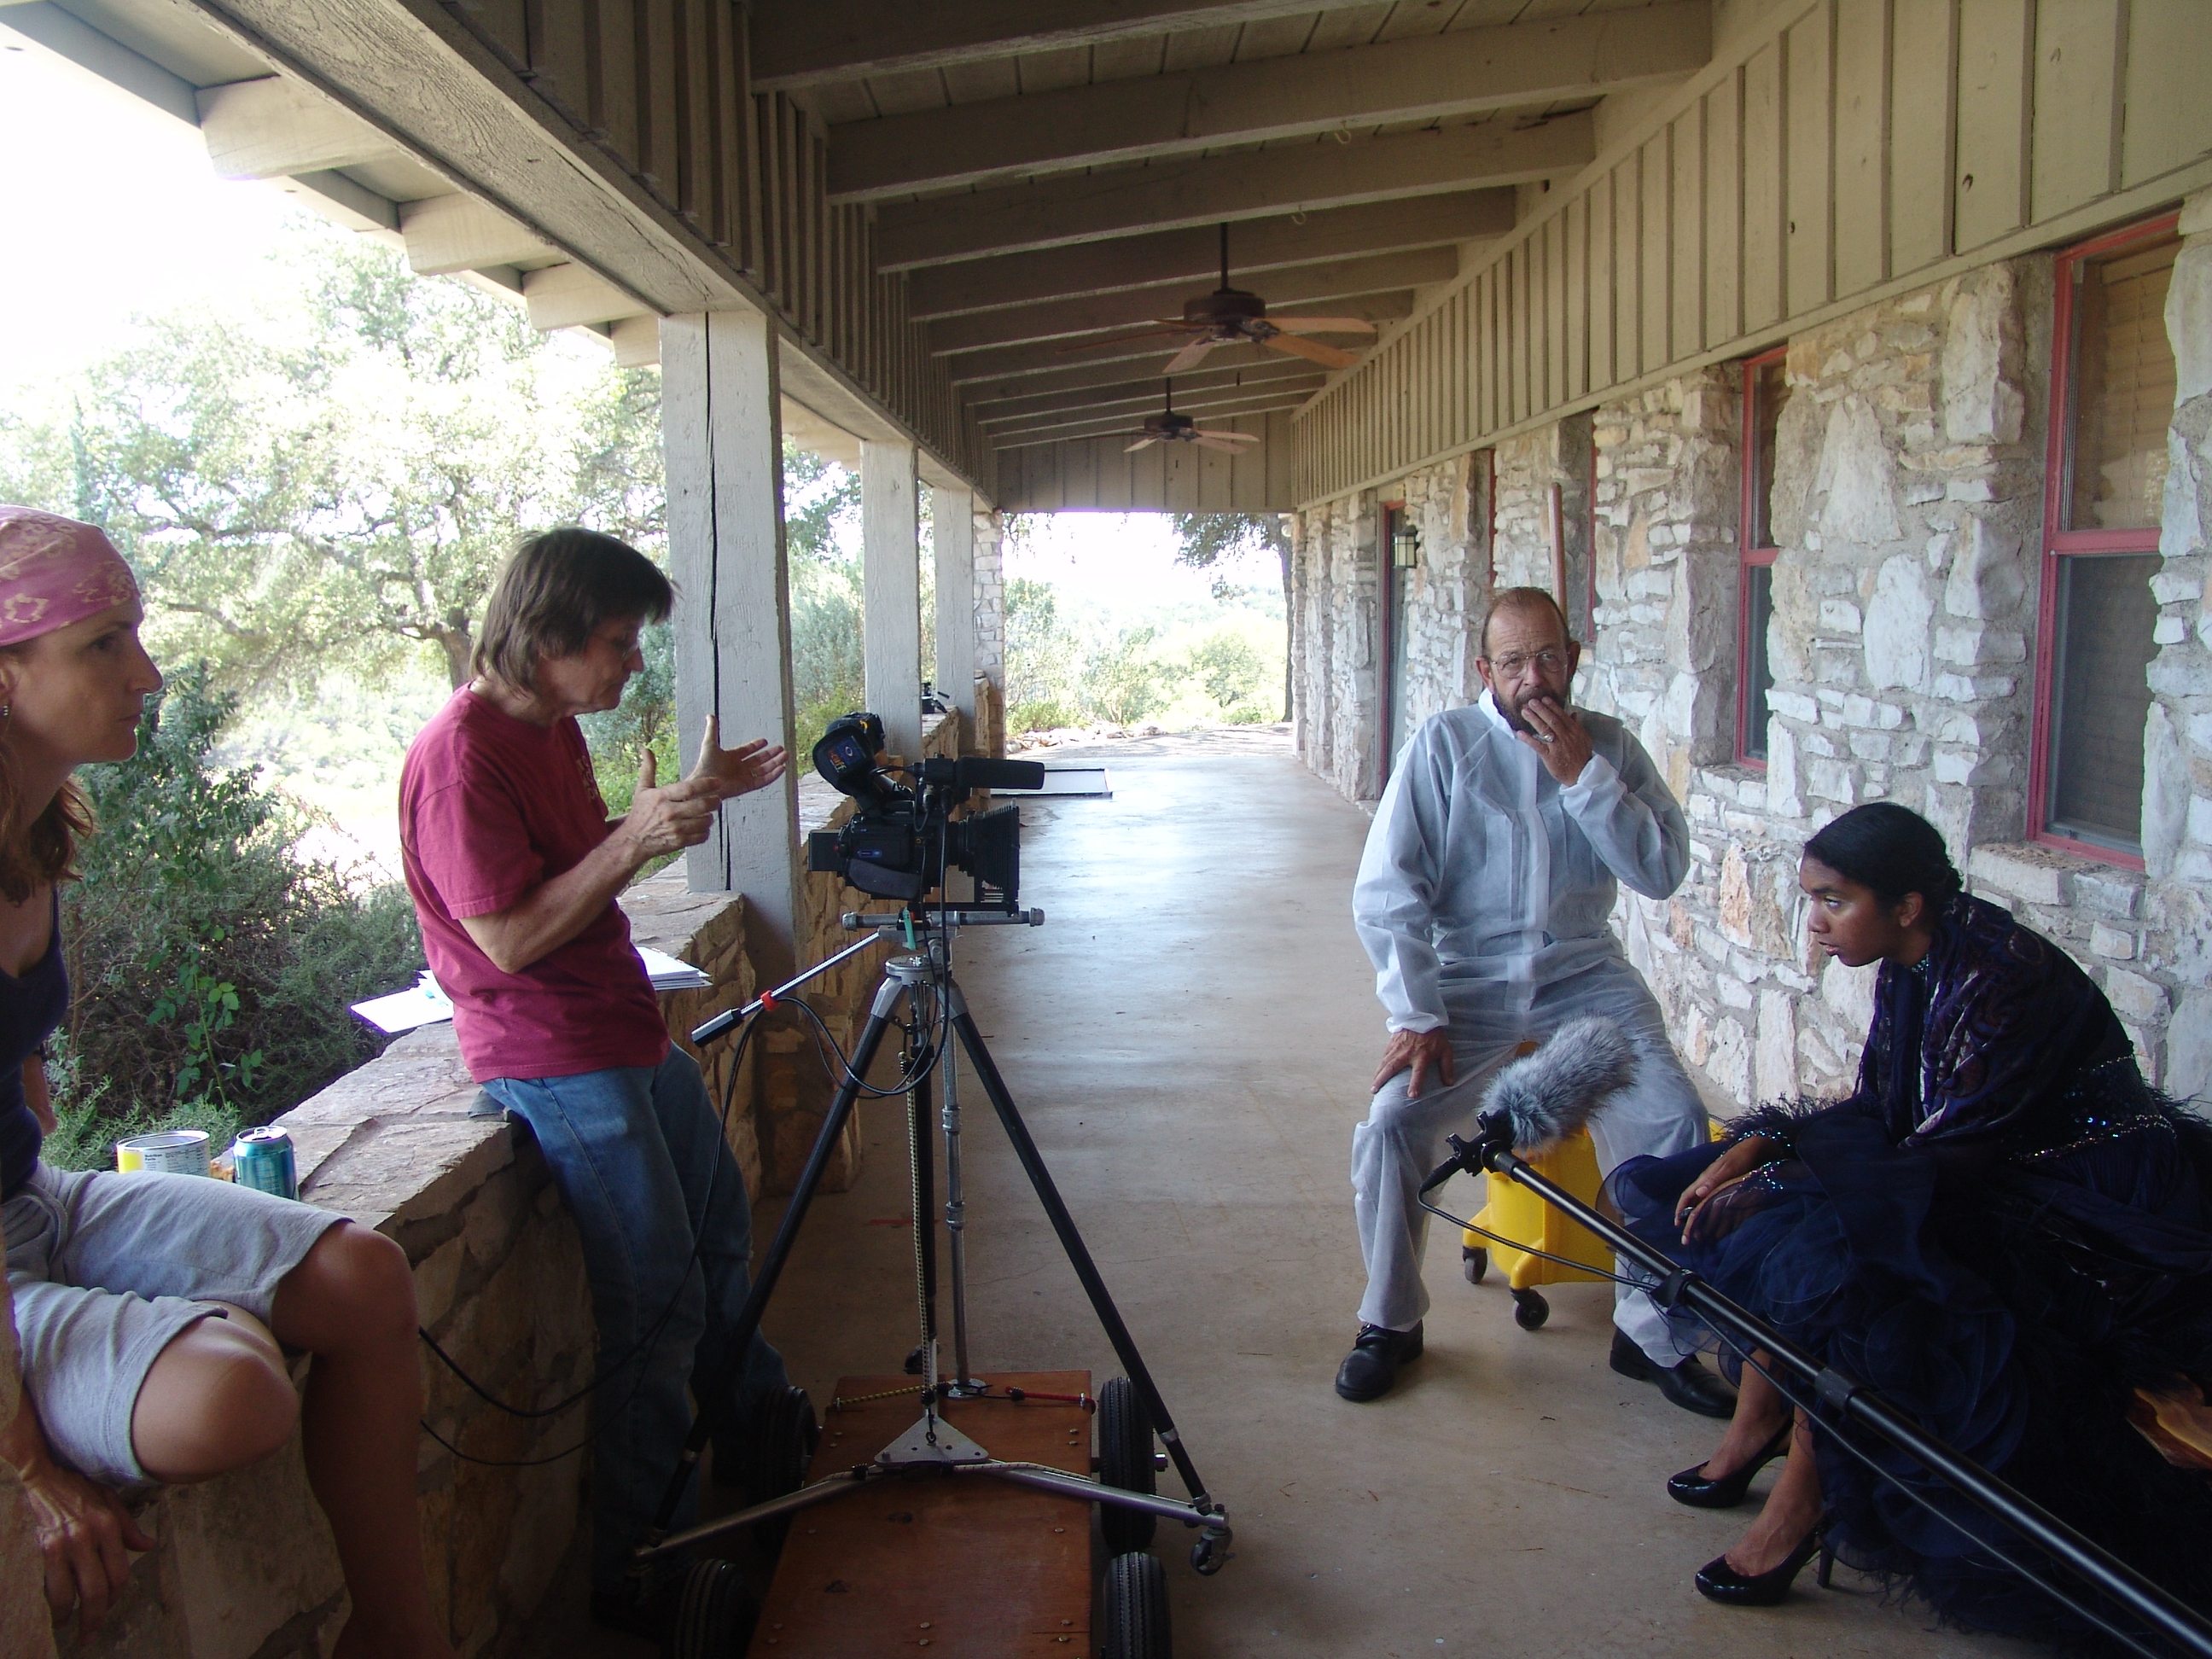 Rodger Marion discussing a scene with John Daws and Paloma Bermudez